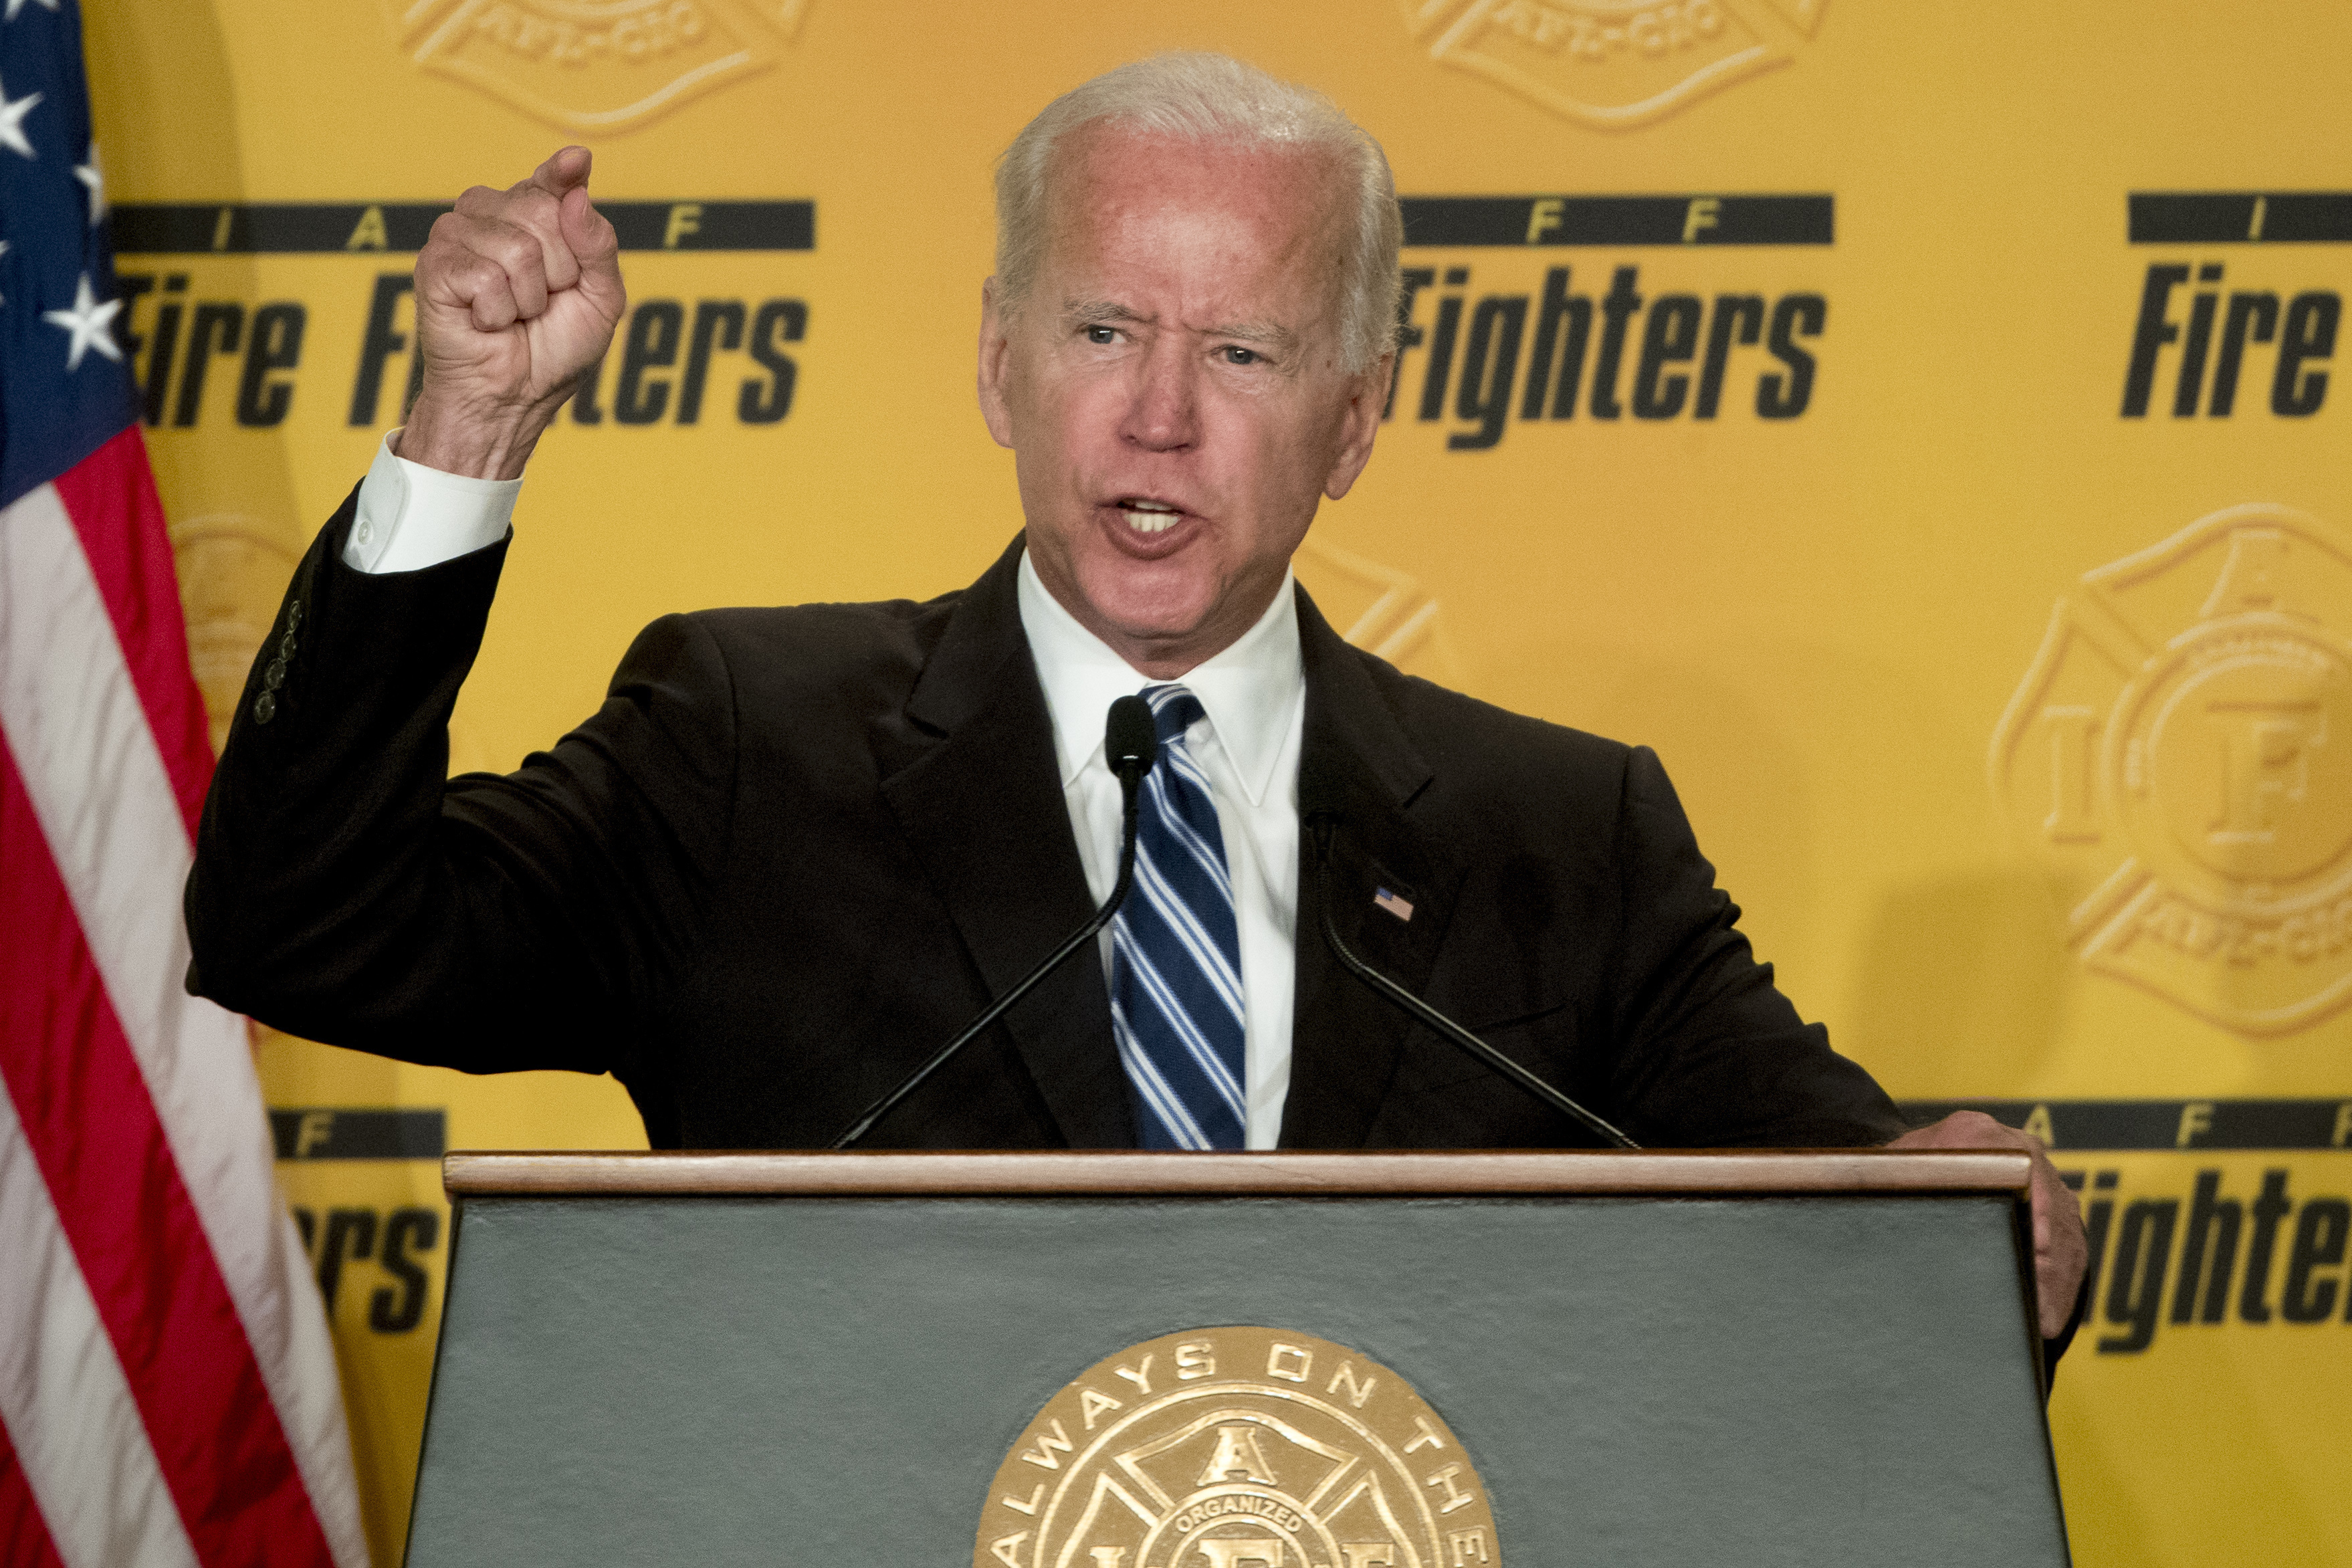 Biden faces new scrutiny from Dems over behavior with women